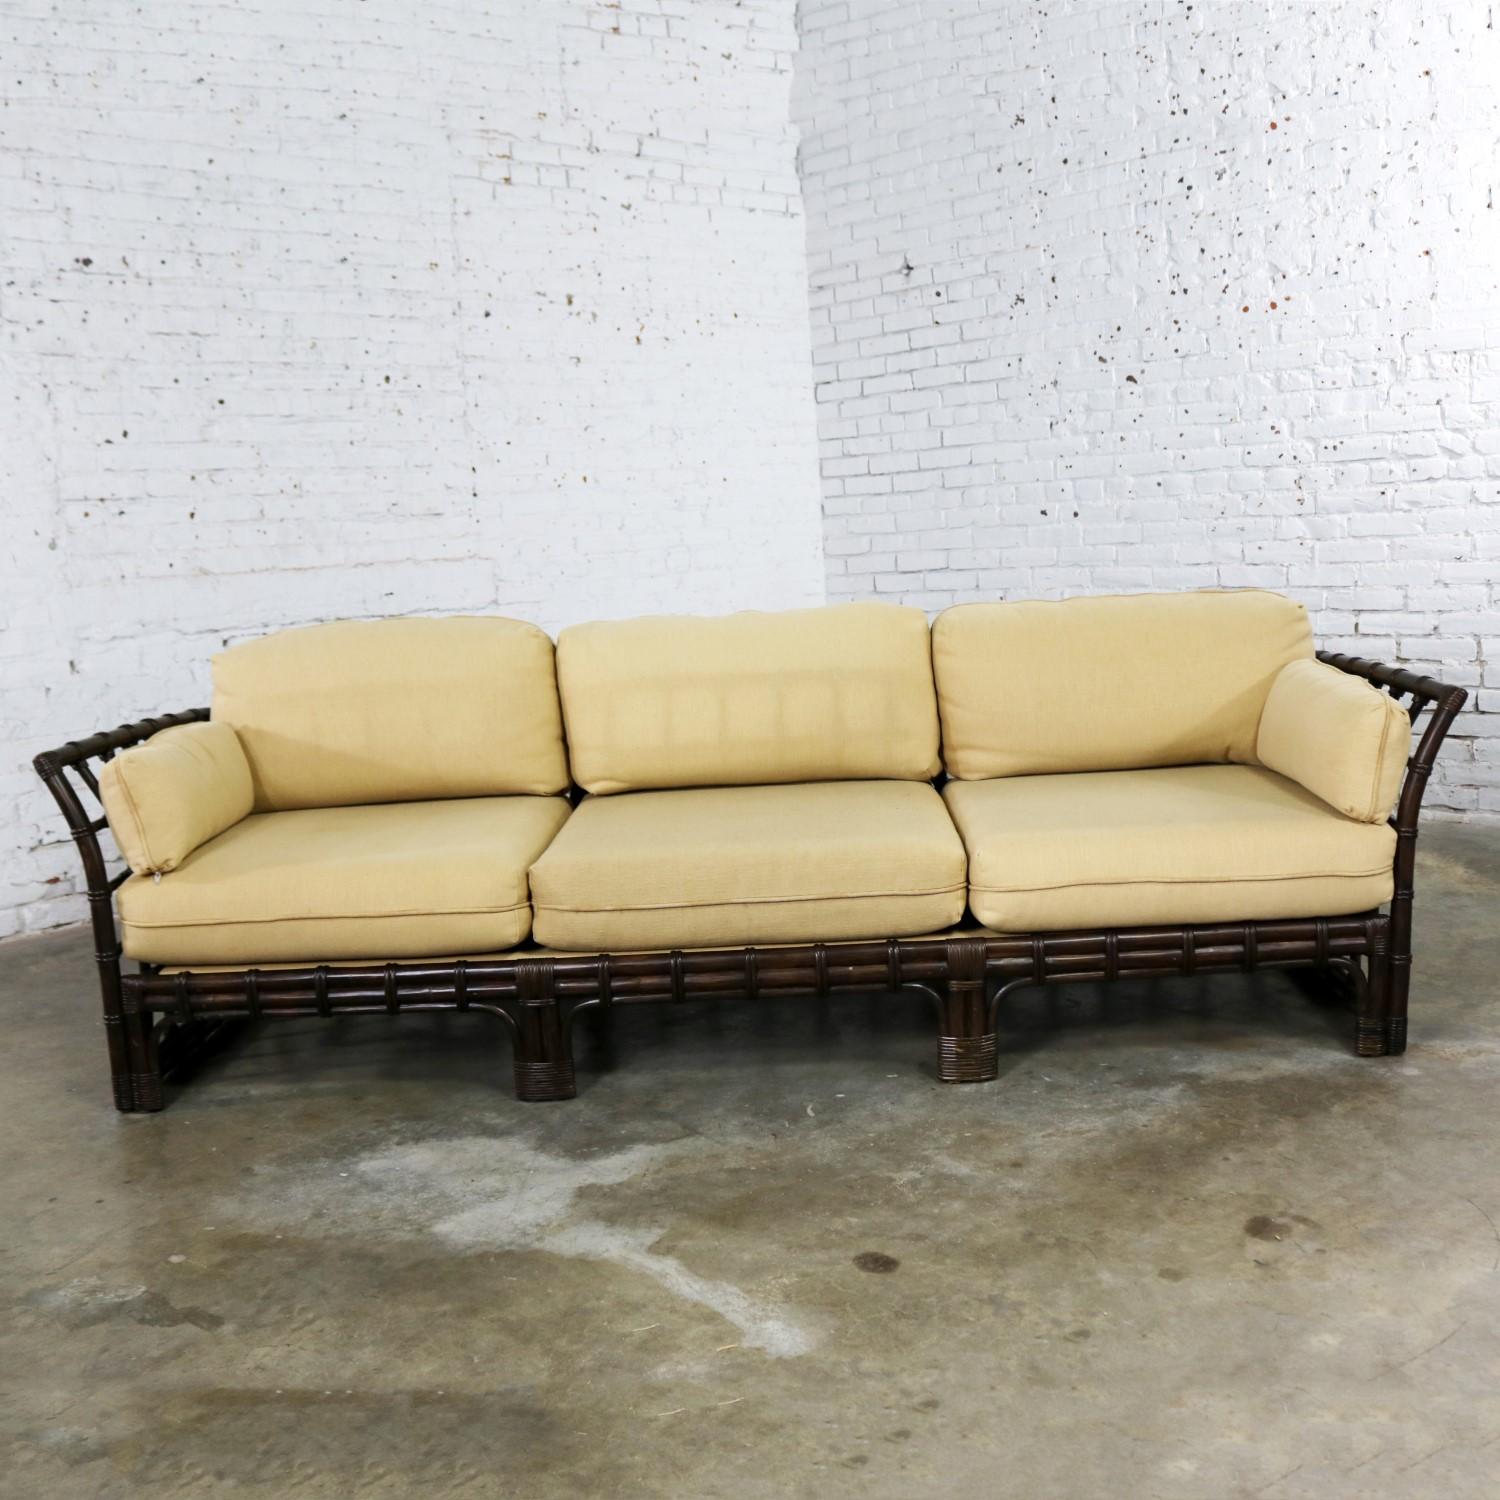 Handsome windowpane style rattan sofa by Brown Jordan with straw colored upholstered cushions. It is in wonderful vintage condition. There is slight color fading or discoloration on some of the cushions from being in the same location on the sofa